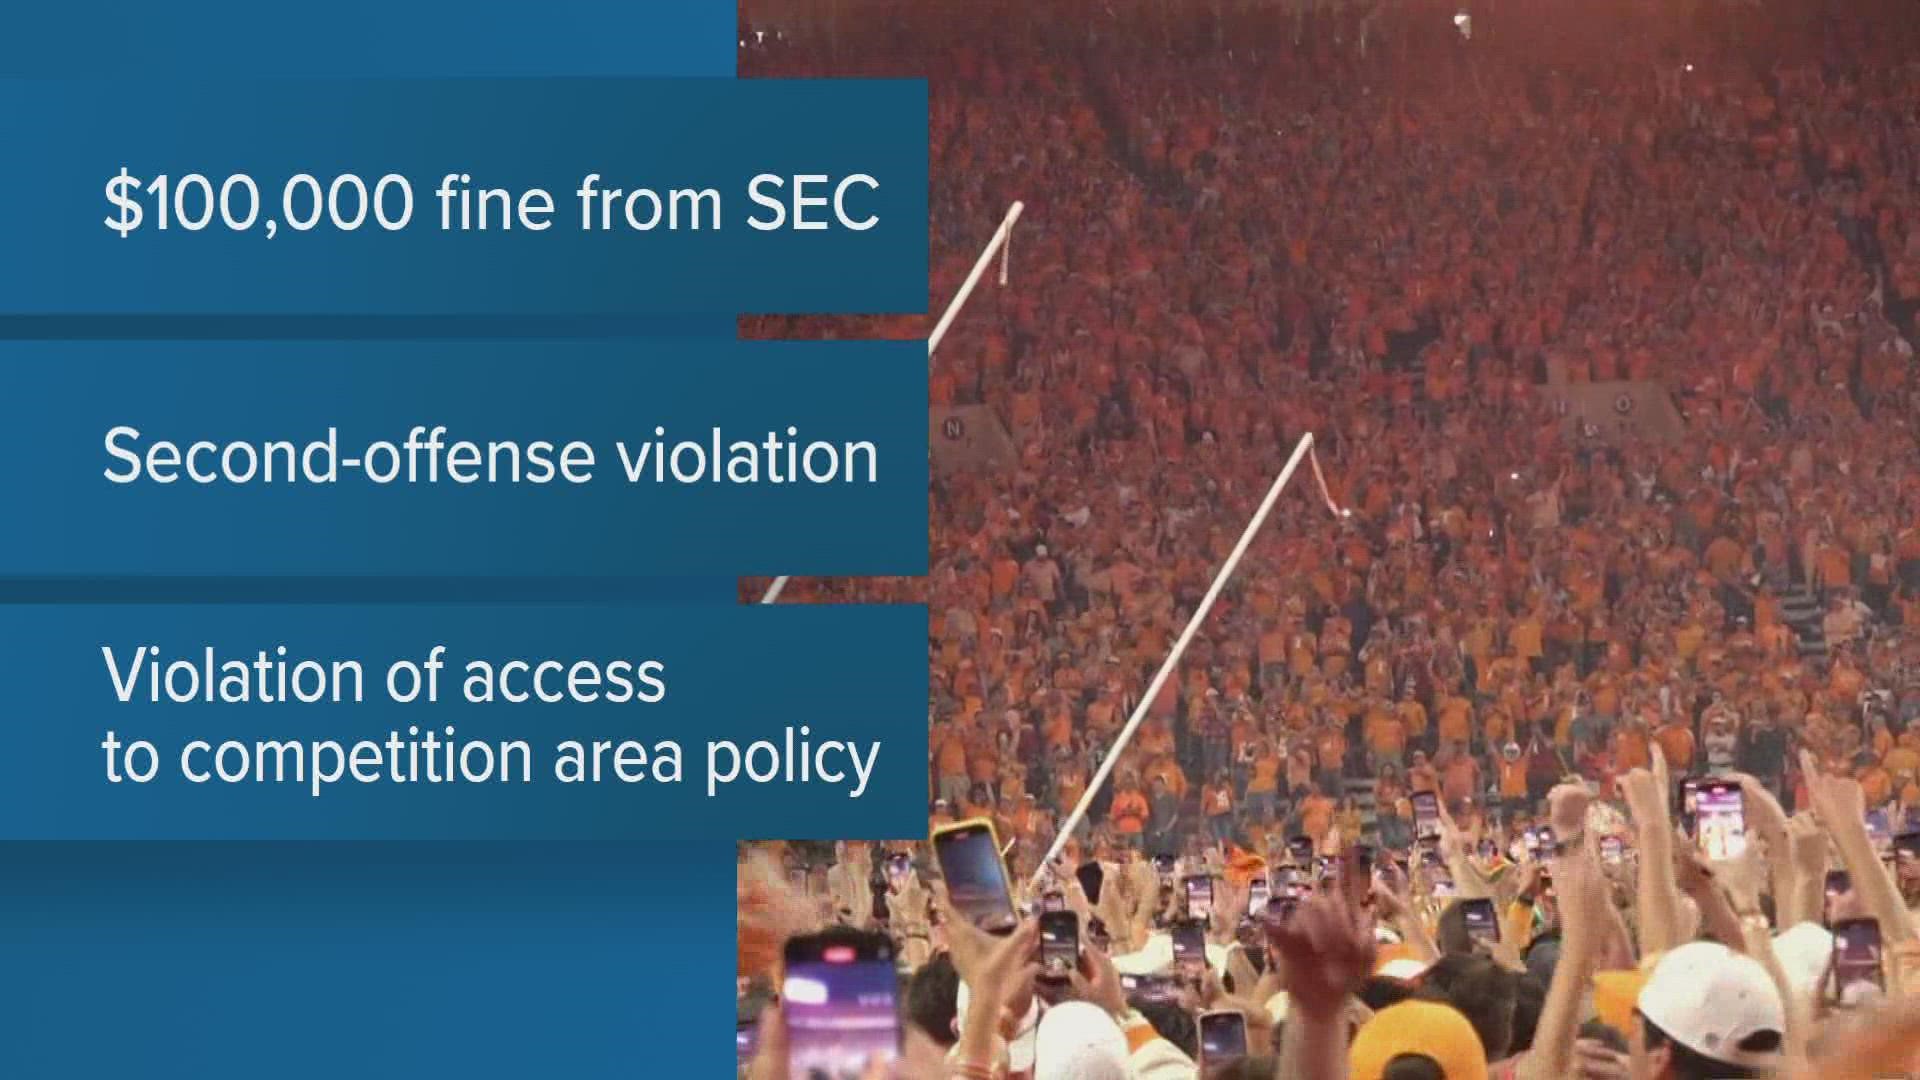 UT will have to pay a $100, 000 fine from the SEC. The conference said it was because fans stormed the field after the game.